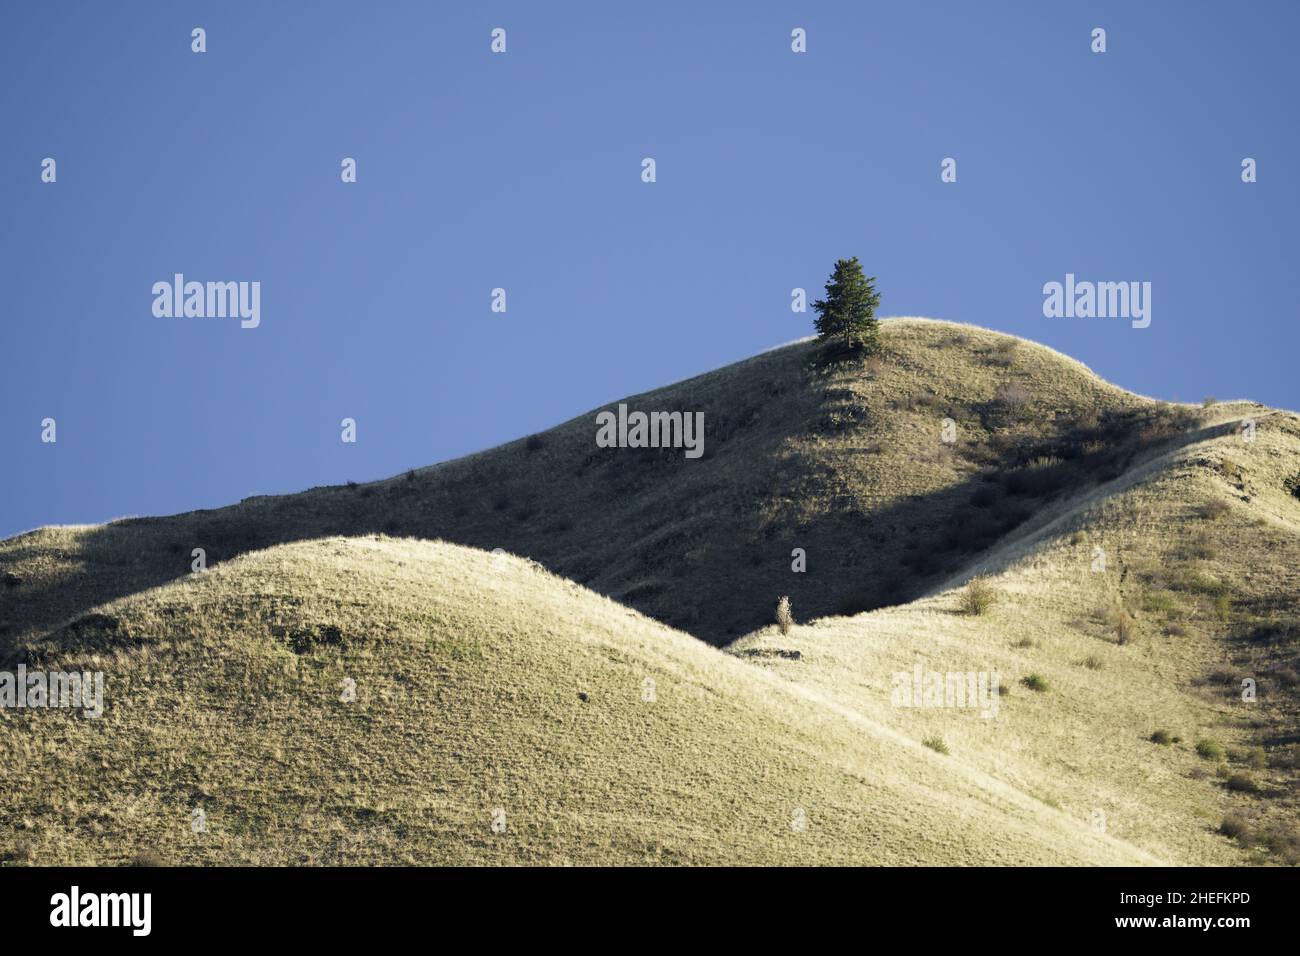 A lone tree on skyline of rolling grassy hills near Puffer Butte, Blue Mountains, Umatilla National Forest, Asotin County, Washington, USA Stock Photo